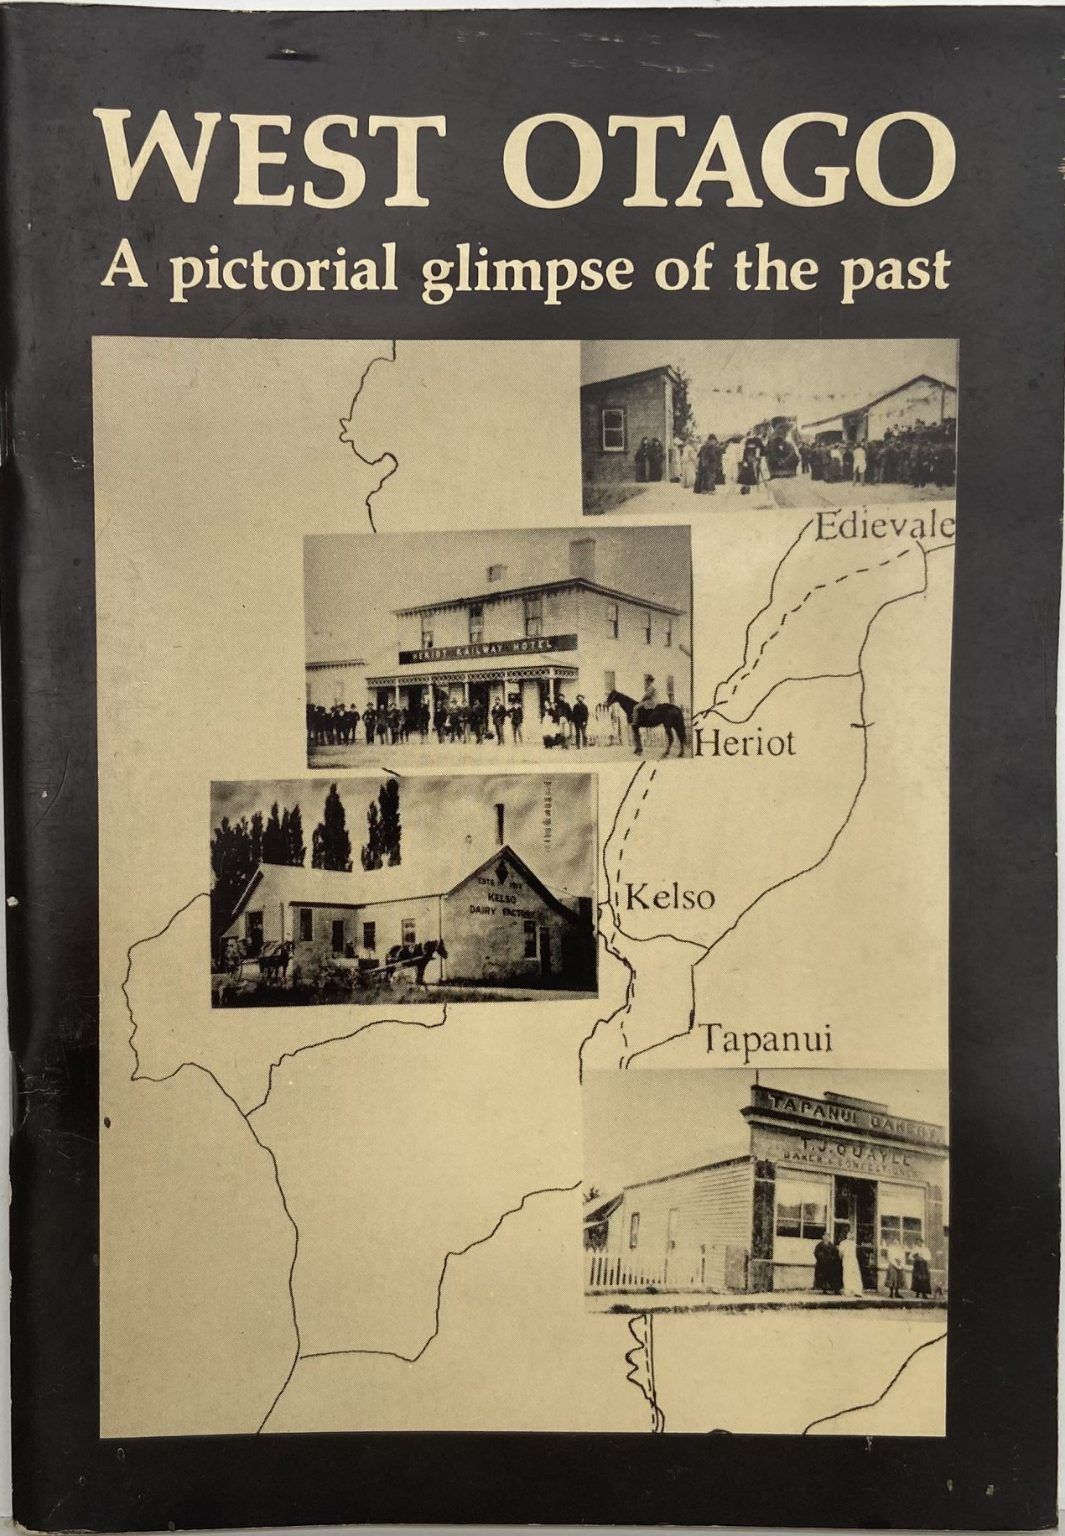 WEST OTAGO: A pictorial glimpse of the past